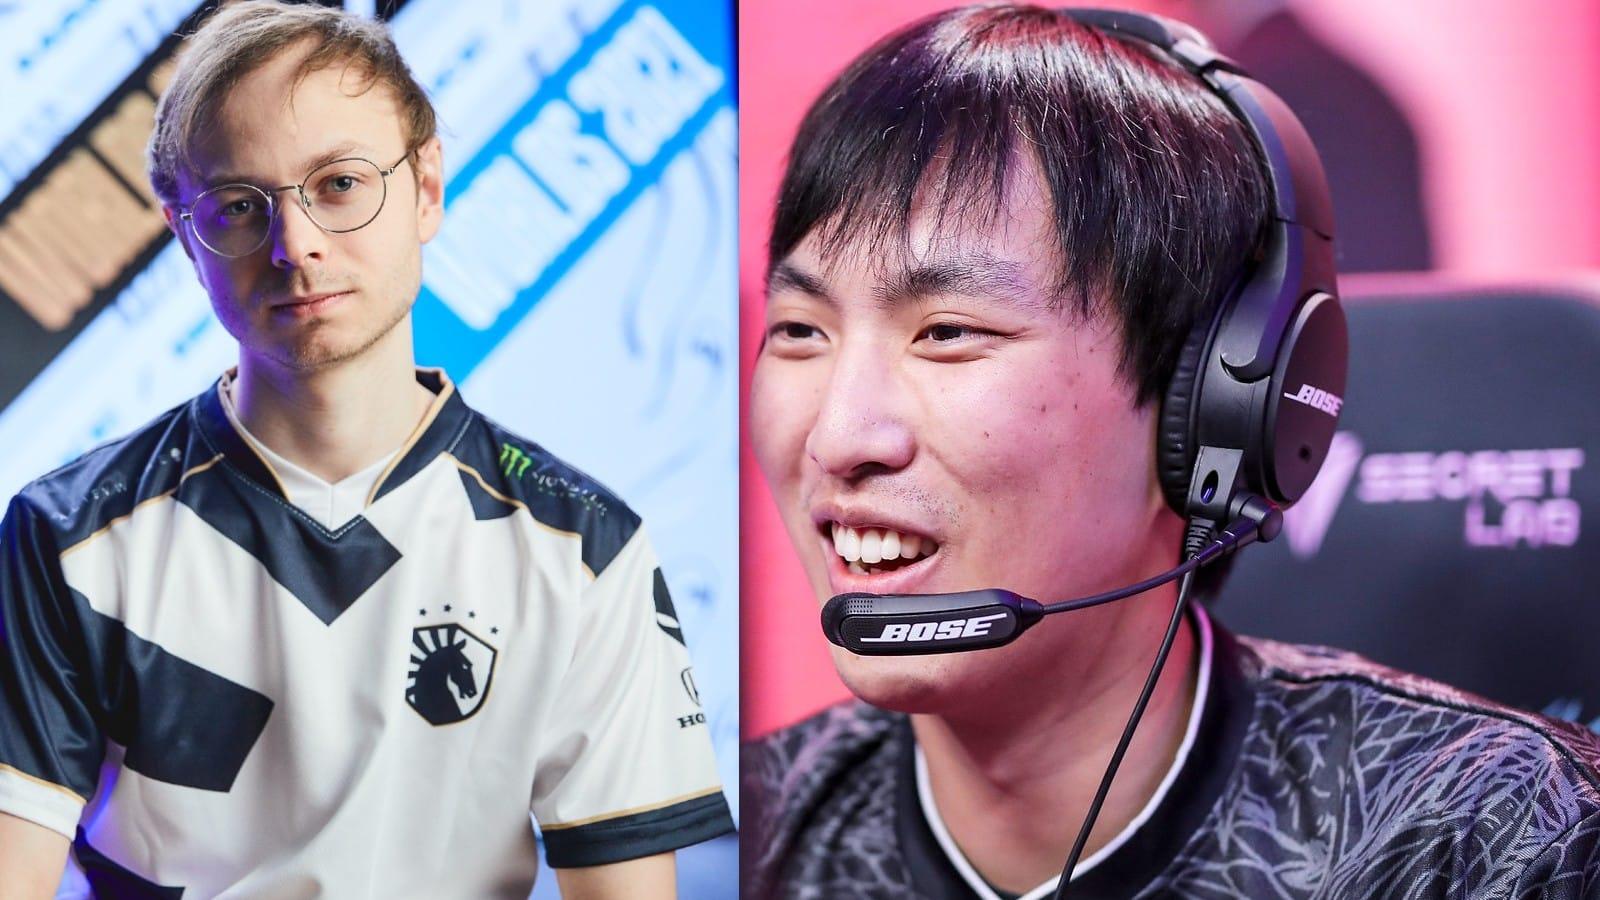 Images of Jensen and Doublelift